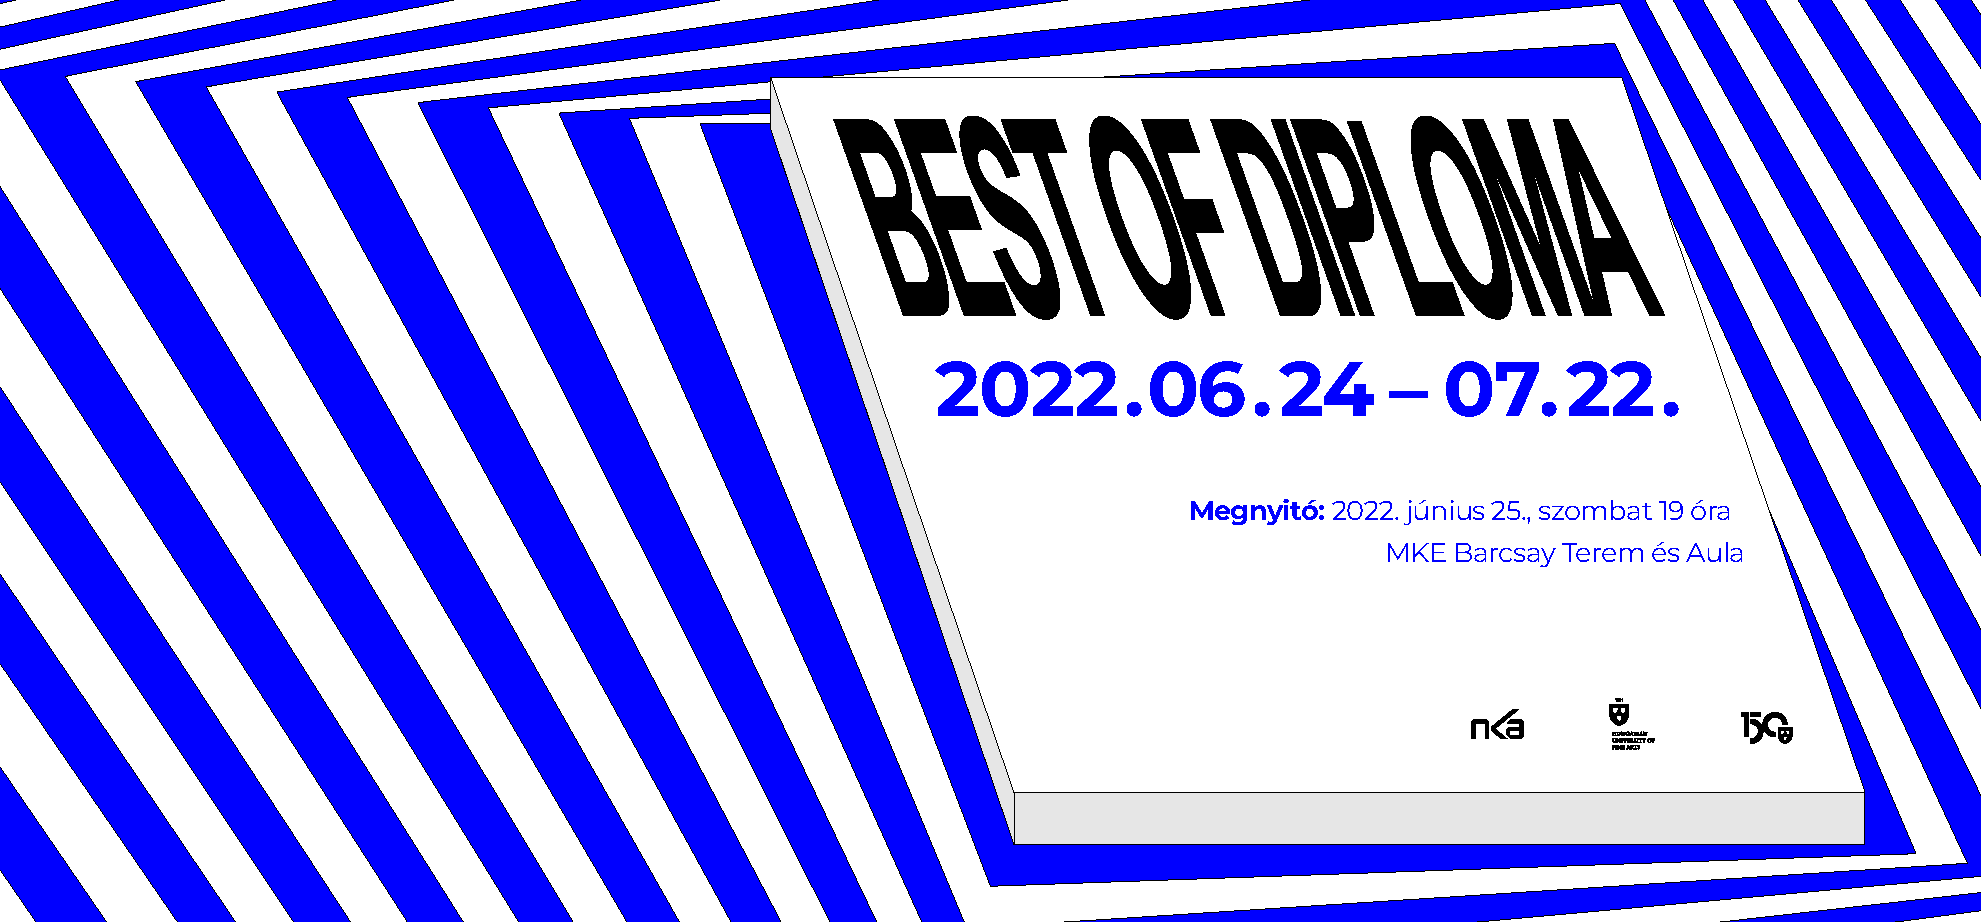 BEST OF DIPLOMA 2022